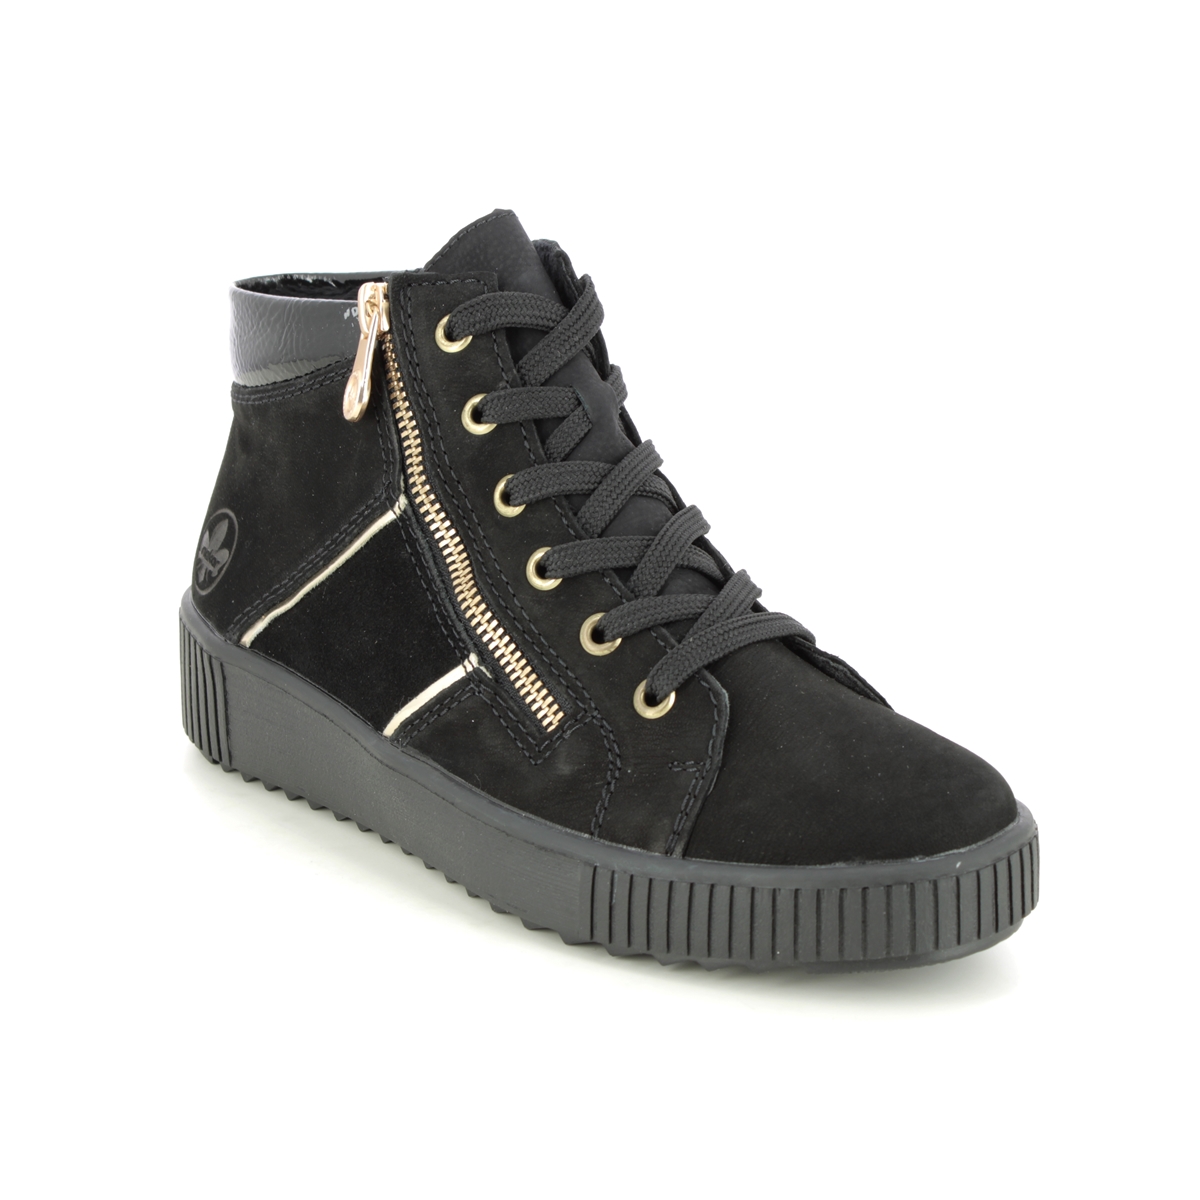 Rieker Y6416-00 Black Suede Womens Hi Tops in a Plain Leather in Size 40